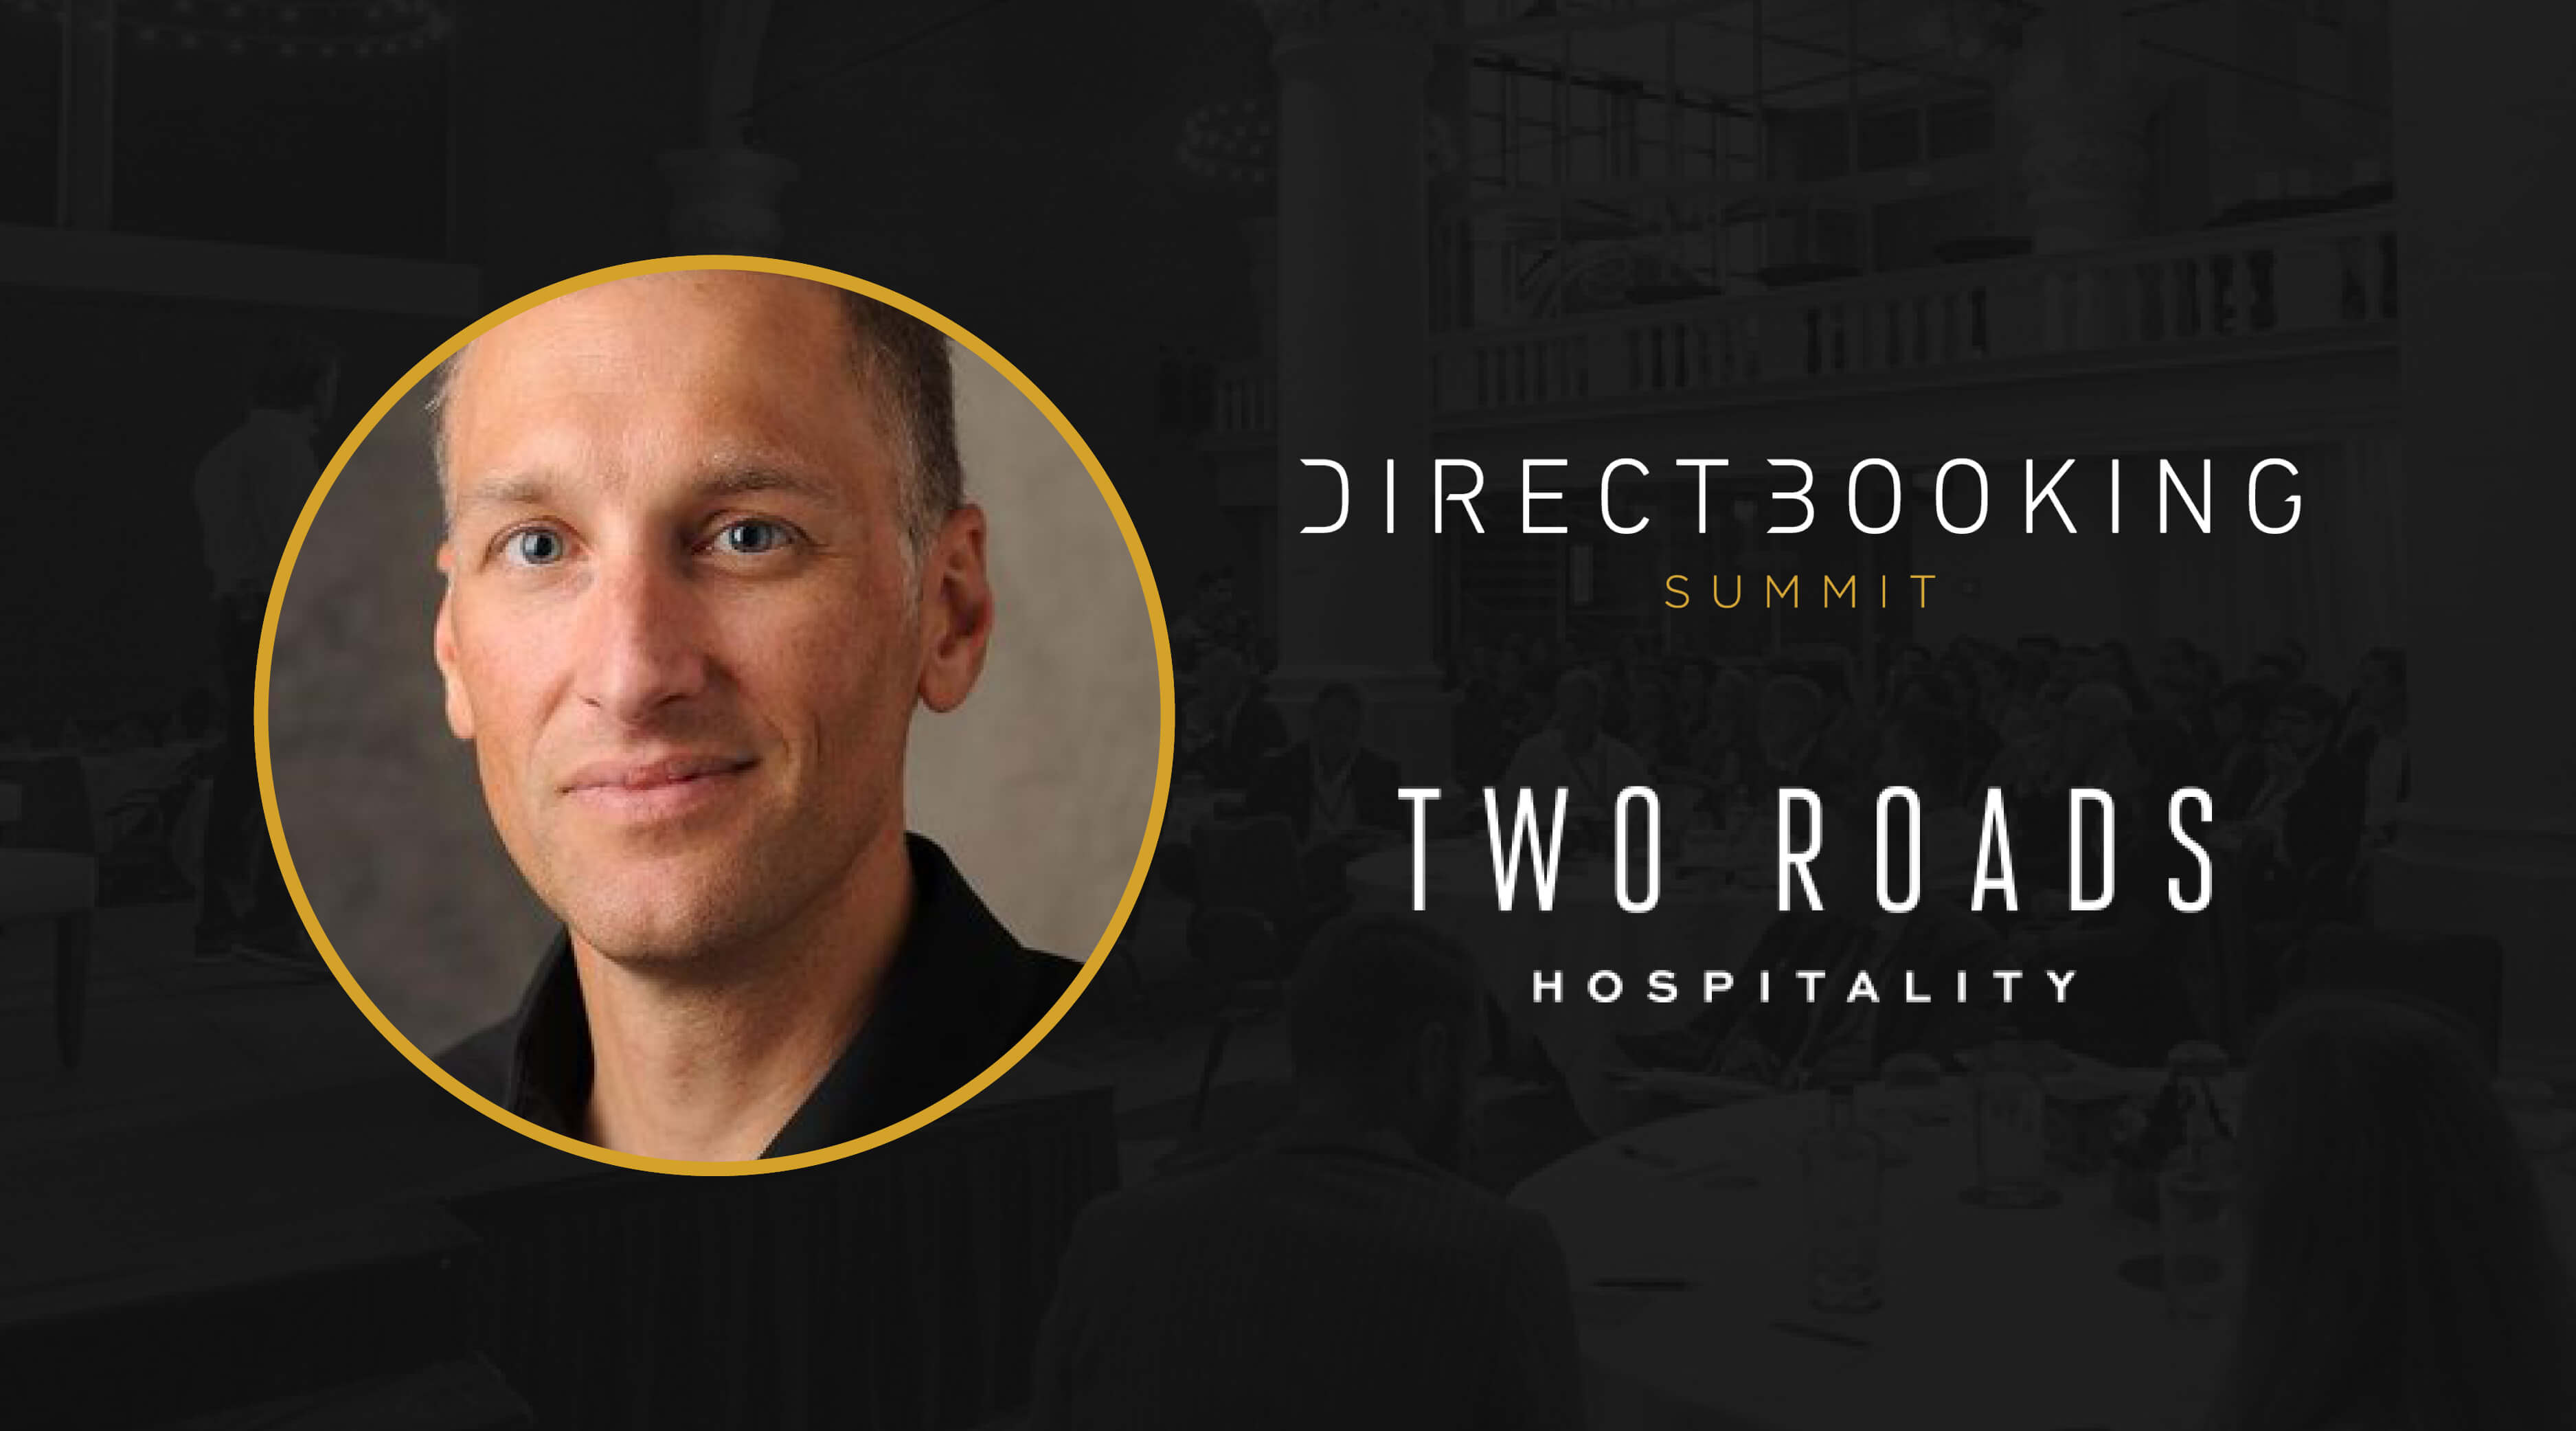 Meet our speaker: Paolo Torchio, Two Roads Hospitality